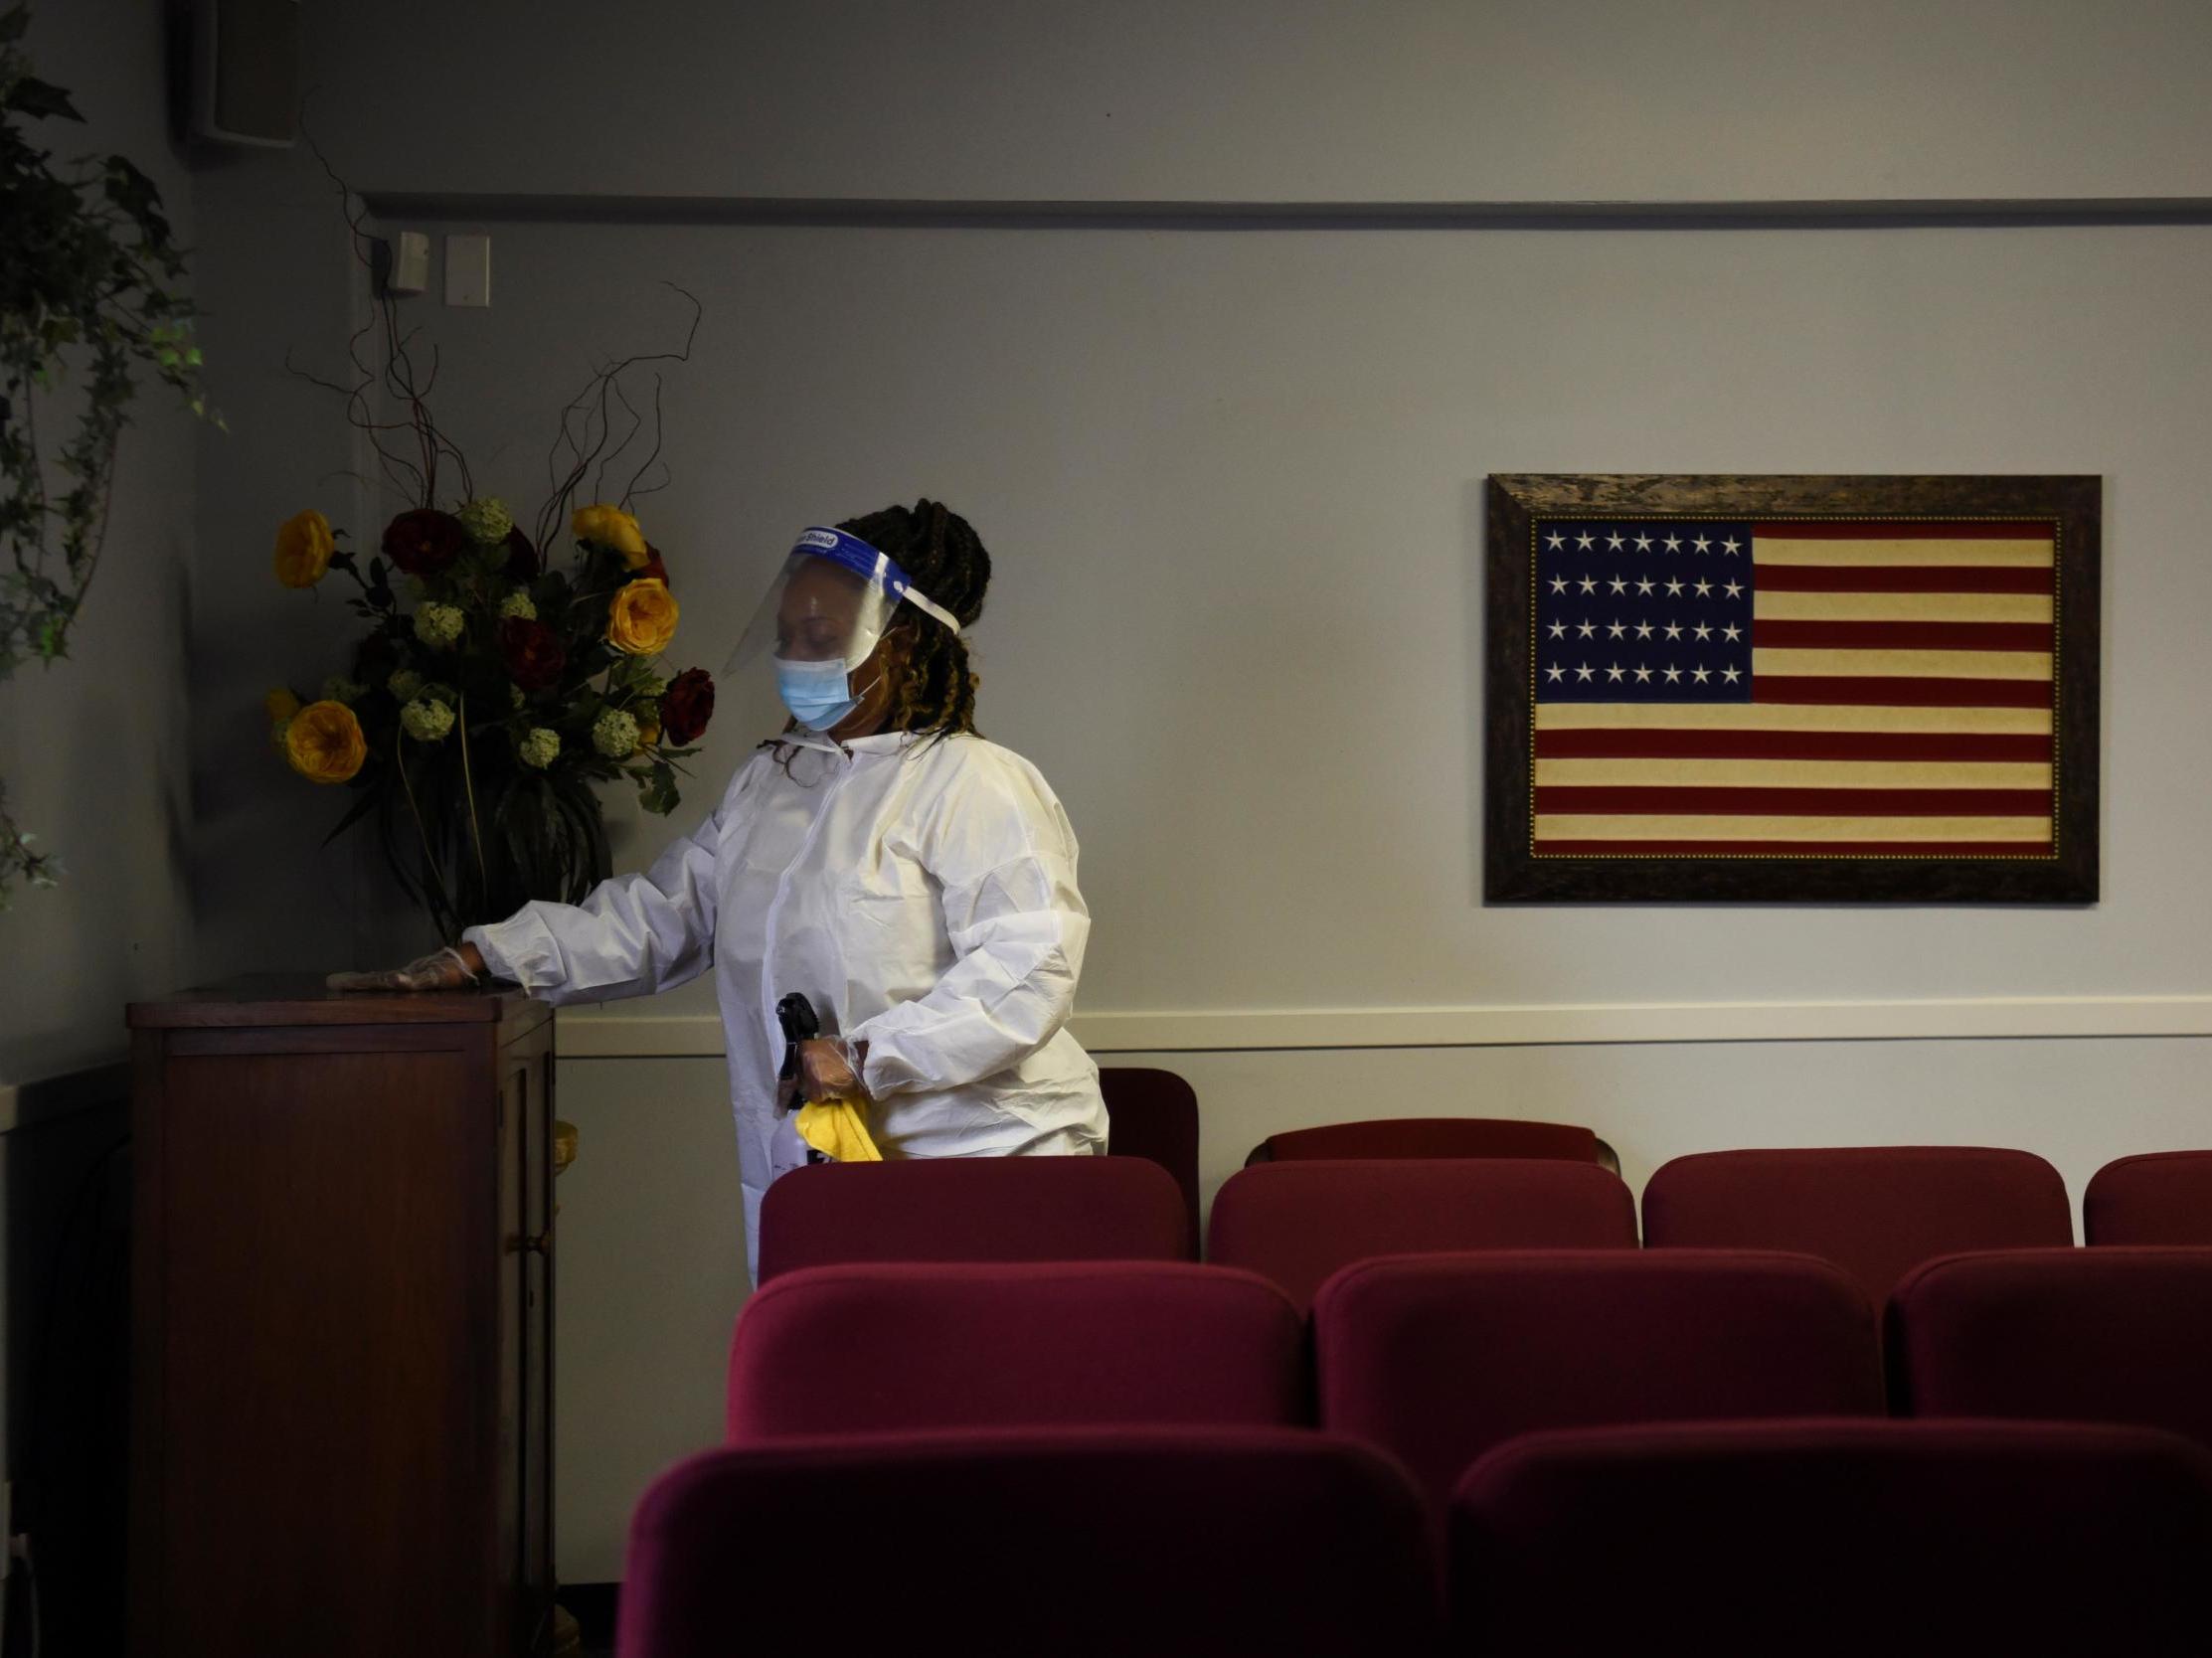 Shayla Williams, 39, disinfects surfaces to prevent the spread of the coronavirus at Beresford Funeral Service in Houston, Texas. The US has seen more than 166,000 deaths during the pandemic, ranking it first for total fatalities.